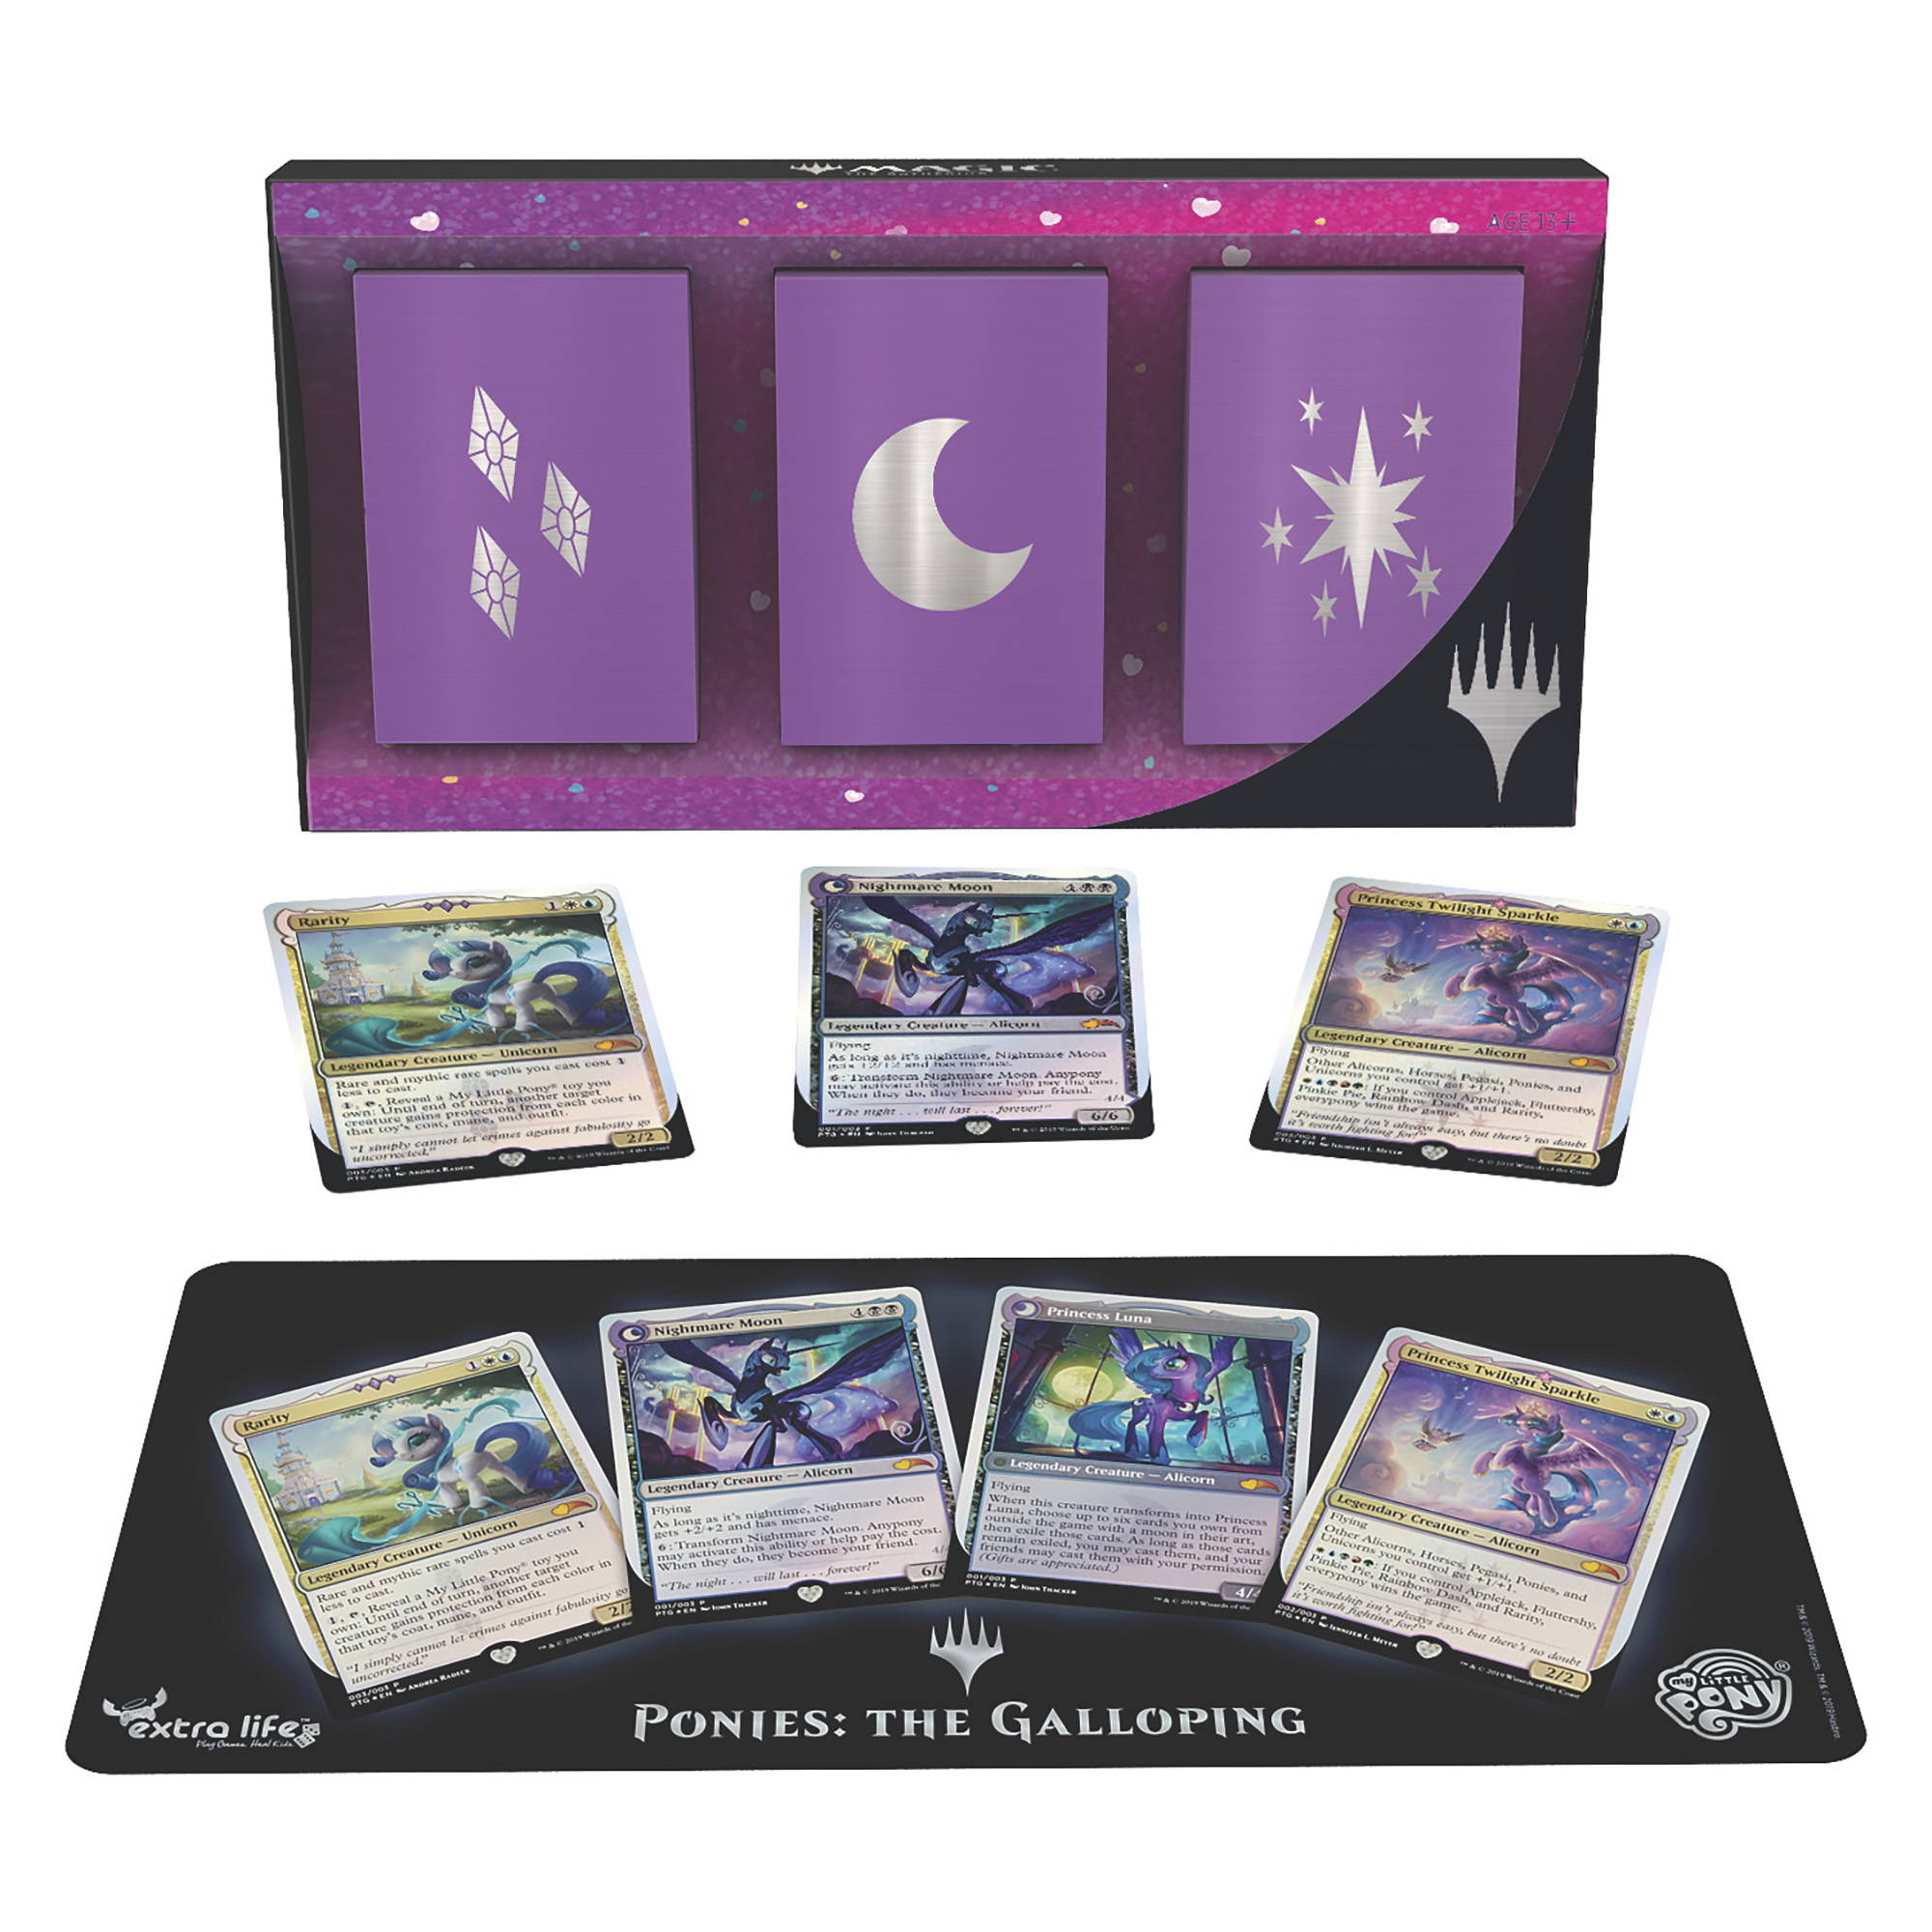 The Gathering My Little Pony Ponies The Galloping Mtg Hasbro Sealed Magic